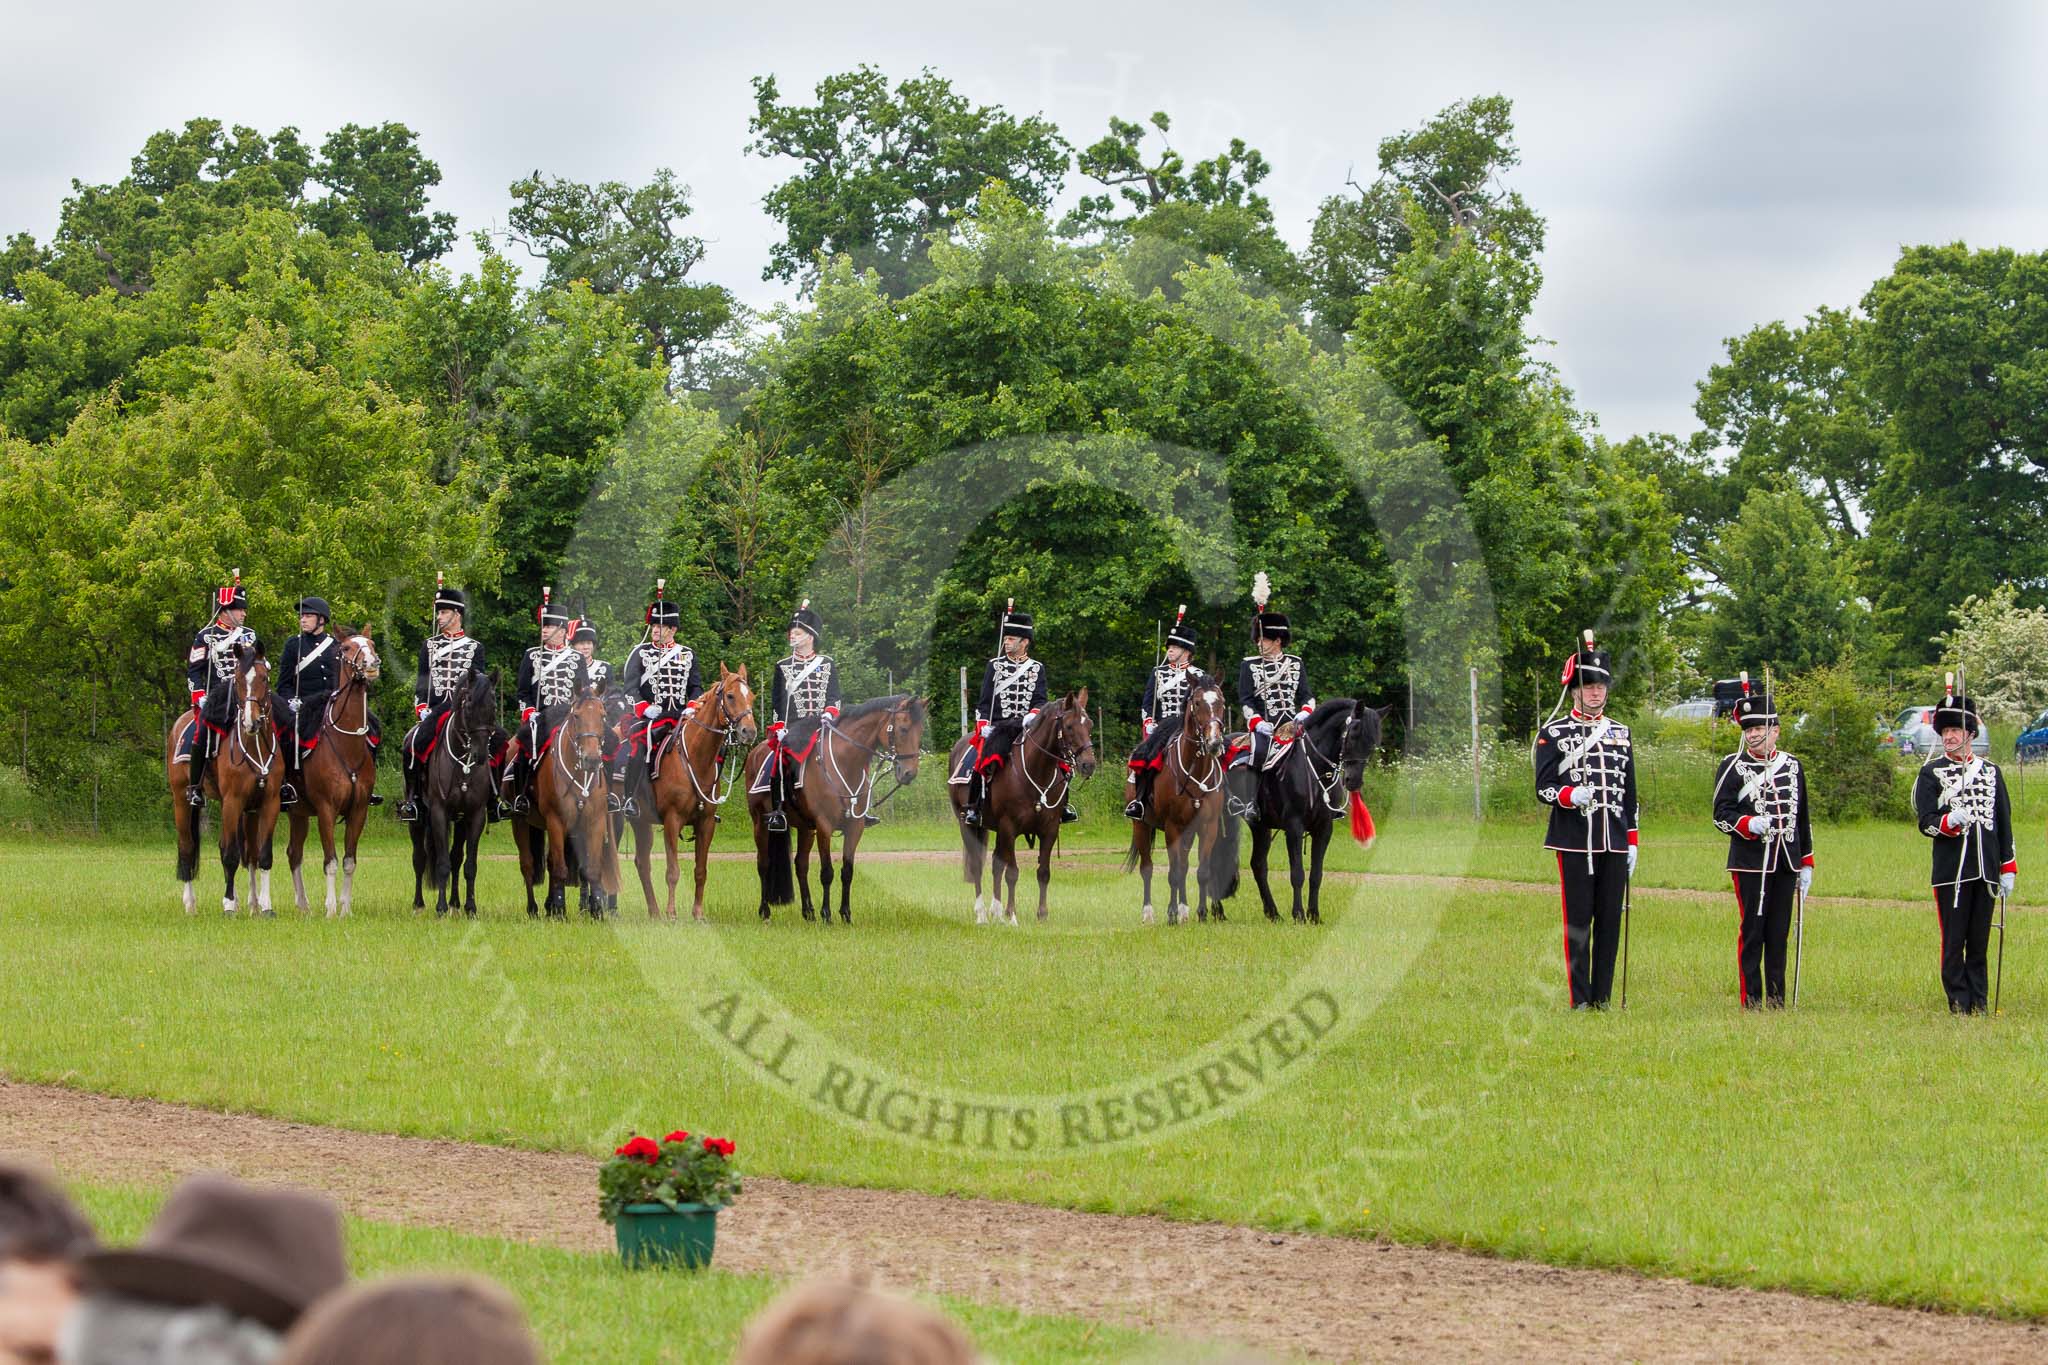 The Light Cavalry HAC Annual Review and Inspection 2013.
Windsor Great Park Review Ground,
Windsor,
Berkshire,
United Kingdom,
on 09 June 2013 at 13:31, image #401